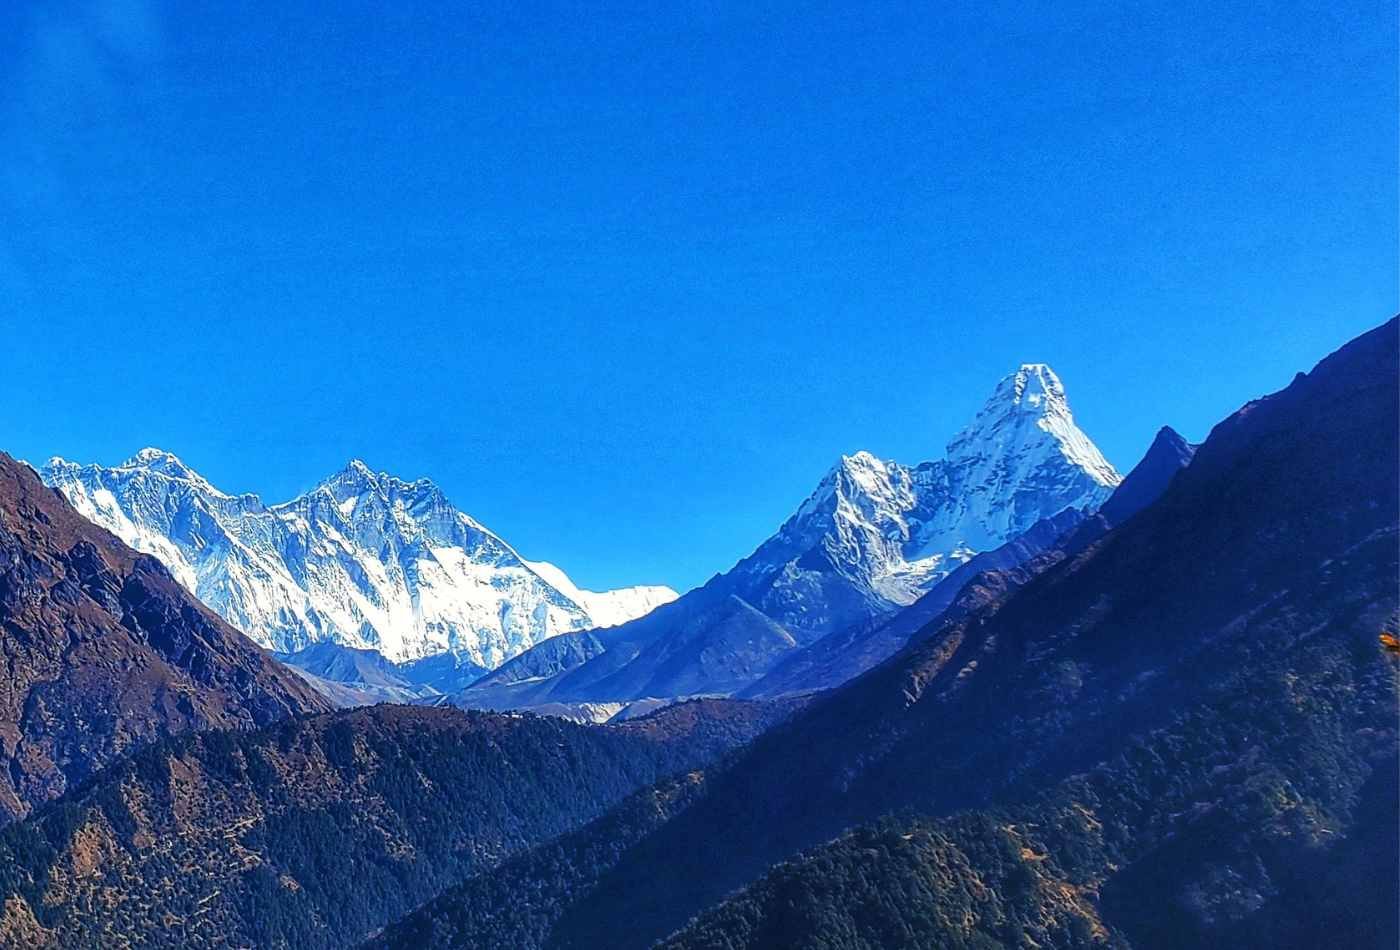 A clear-day panoramic view of Mt. Amadablam, Mt. Lhotse, Mt. Everest, and Tbuche Peak as seen from Syangboche.